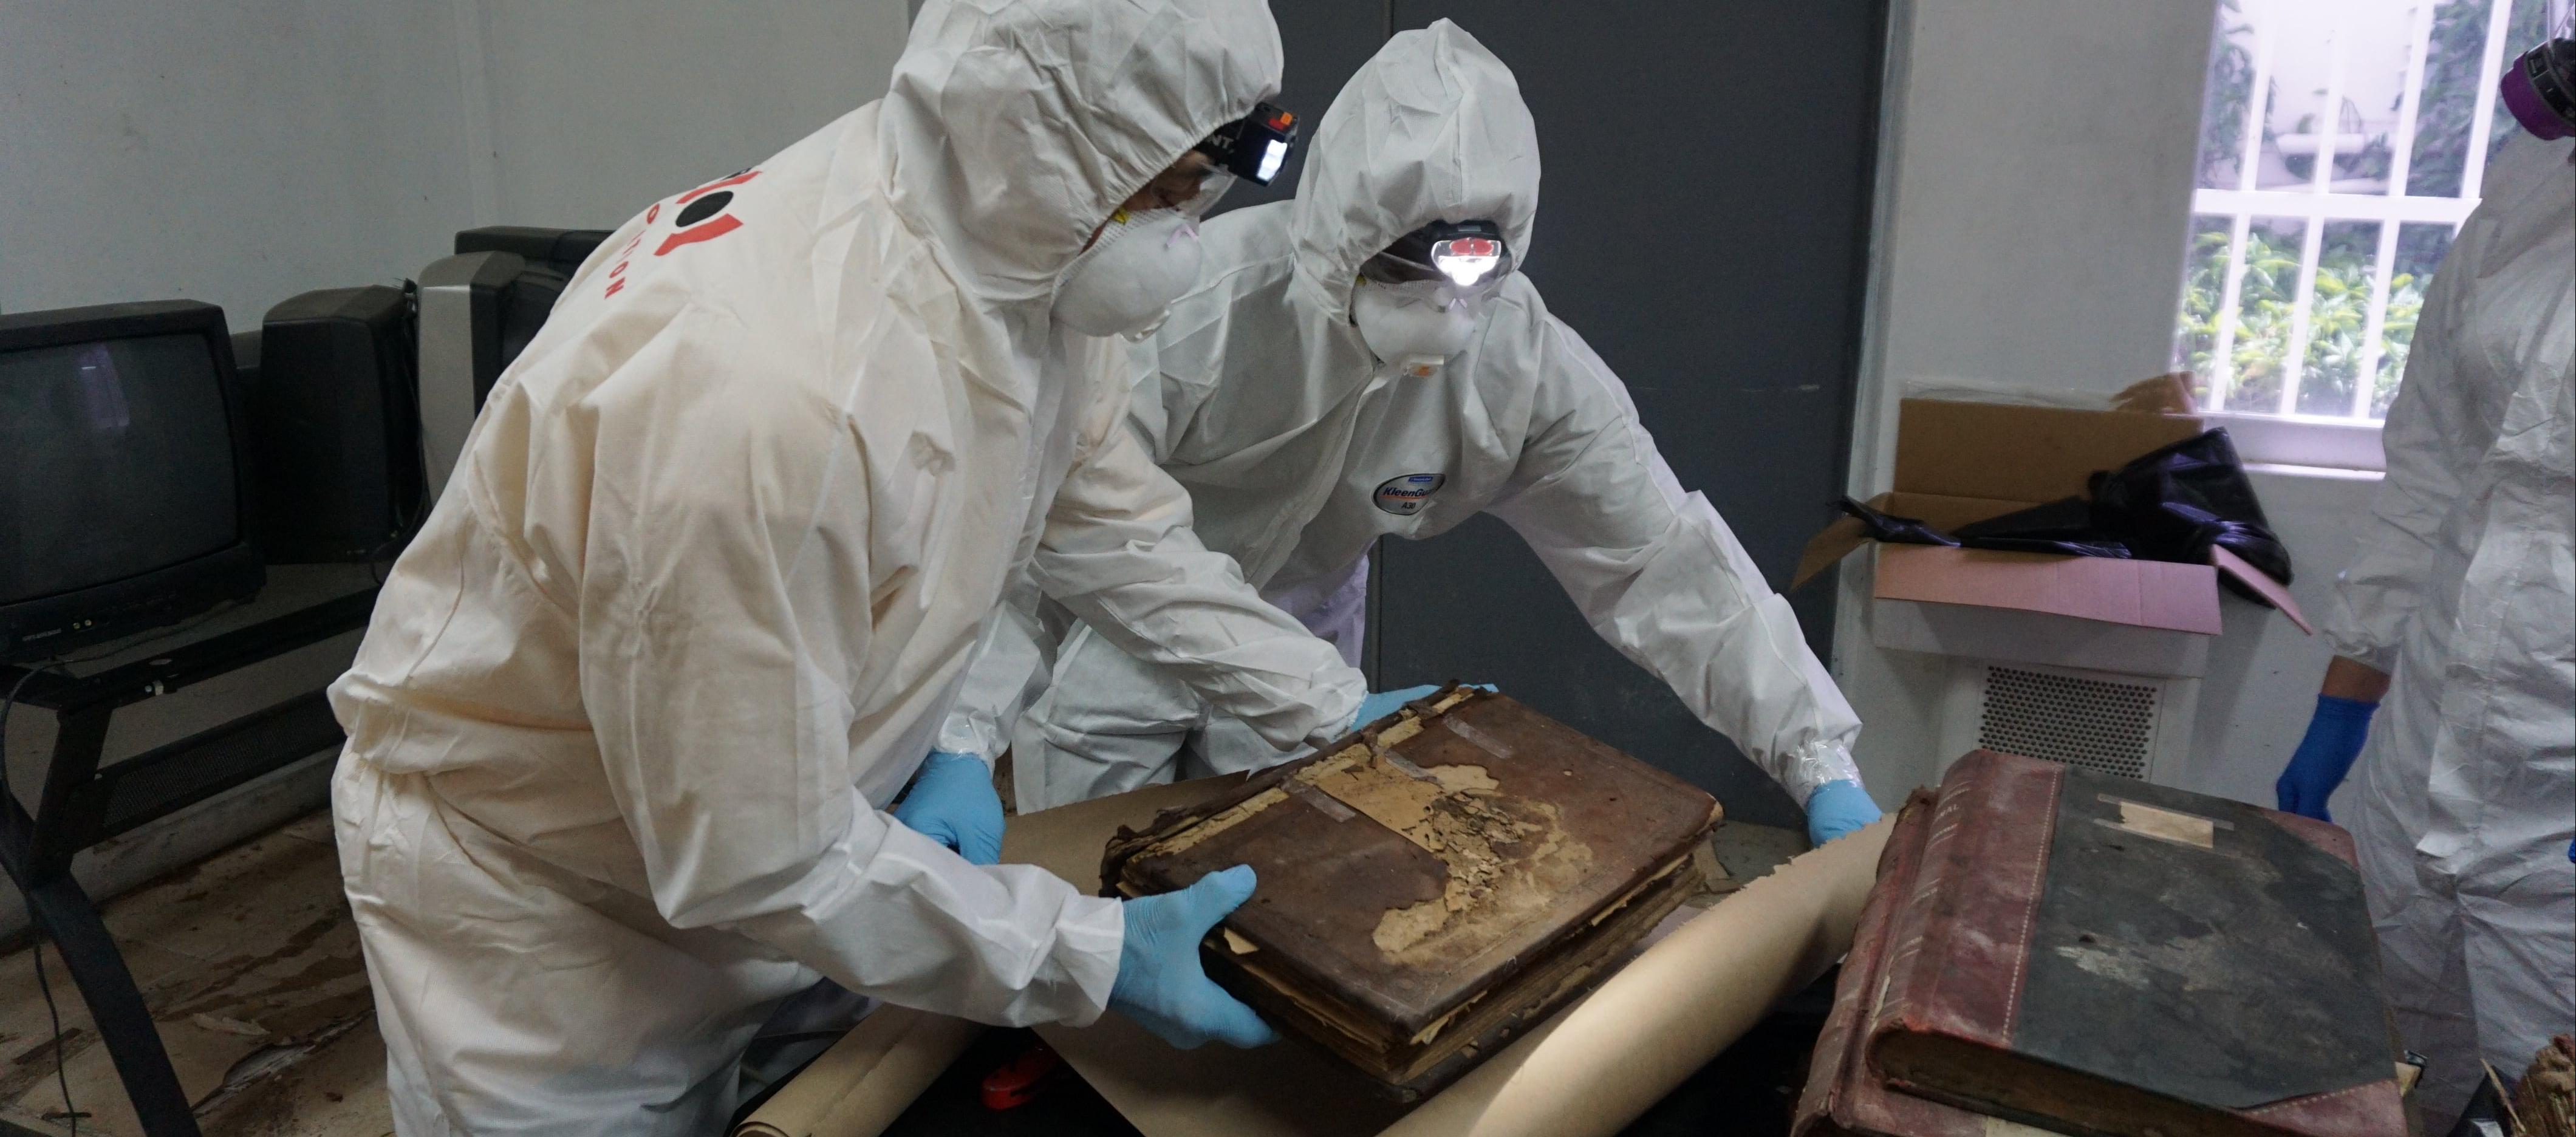 Two people in white hazmat suits handle a damaged historic tome.